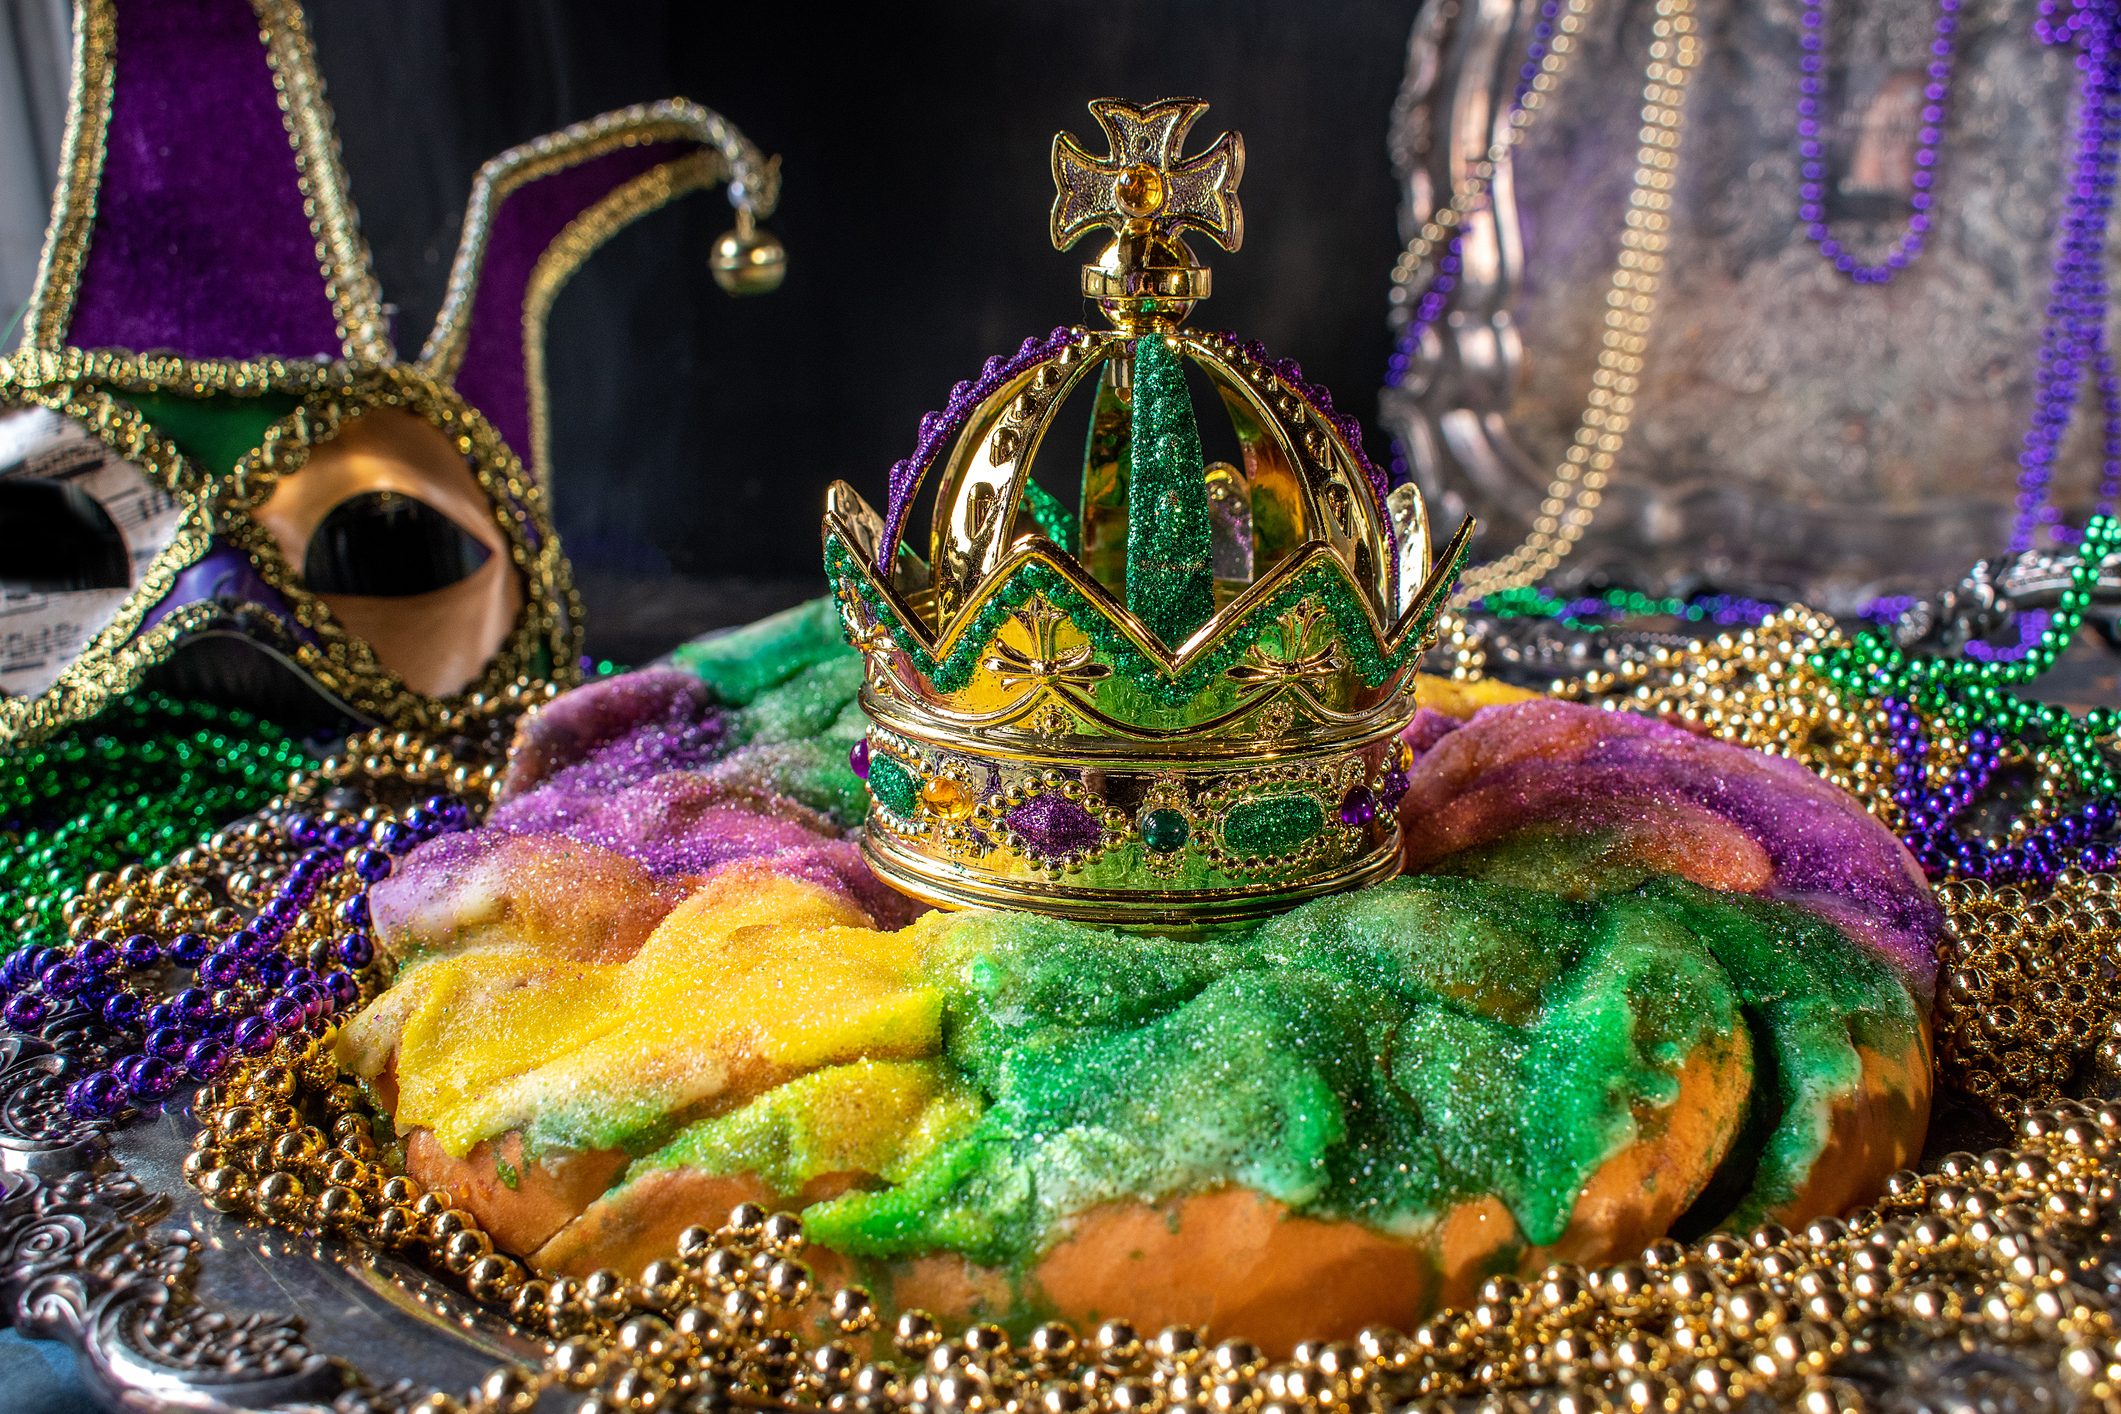 What Is King Cake? — History and Meaning of the Mardi Gras King Cake